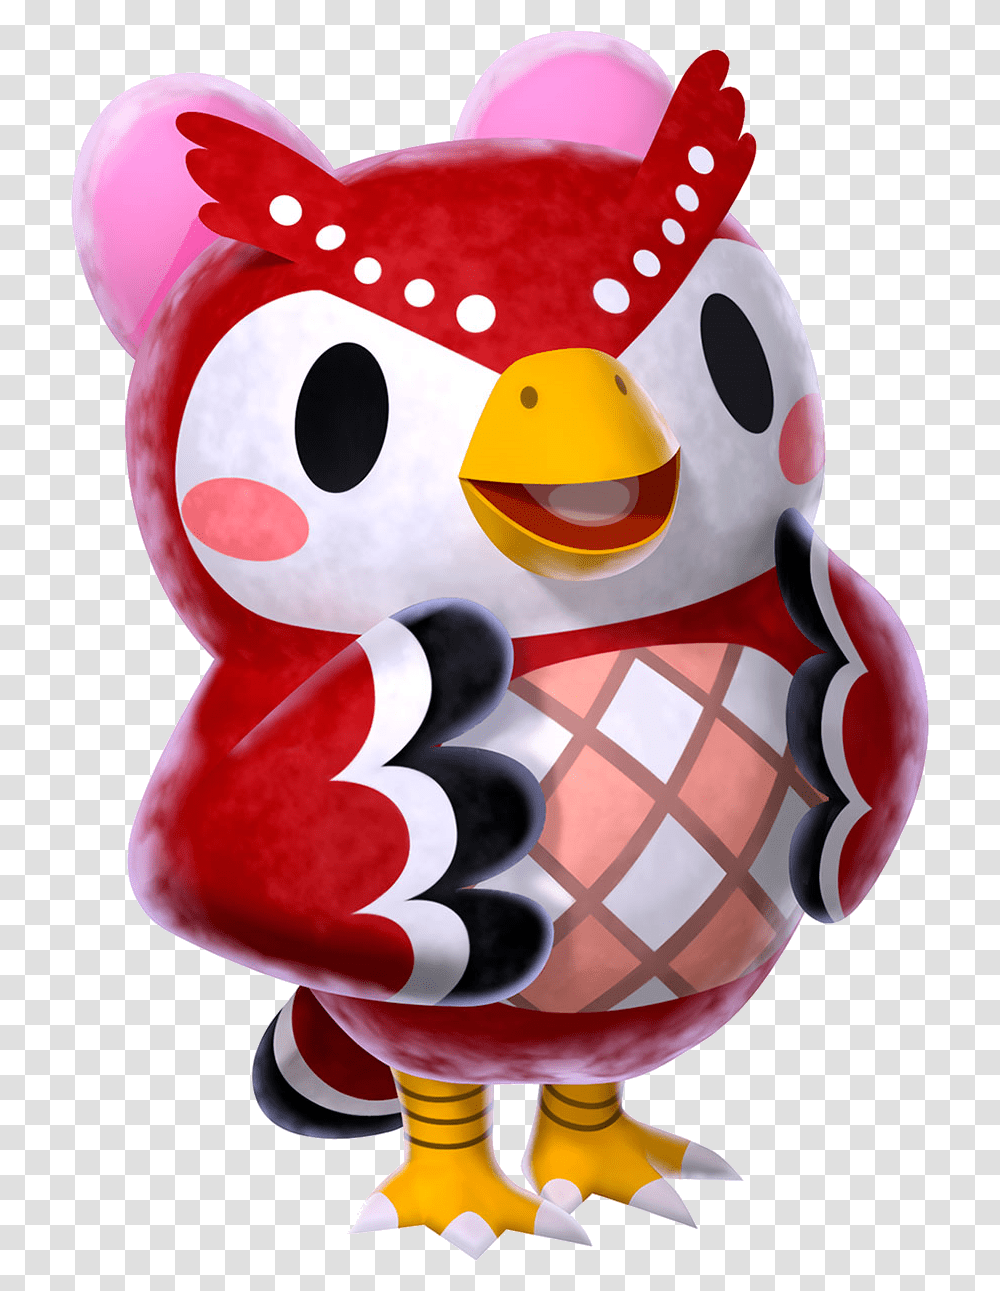 Animal Animal Crossing New Horizons Celeste, Toy, Bird, Angry Birds, Penguin Transparent Png